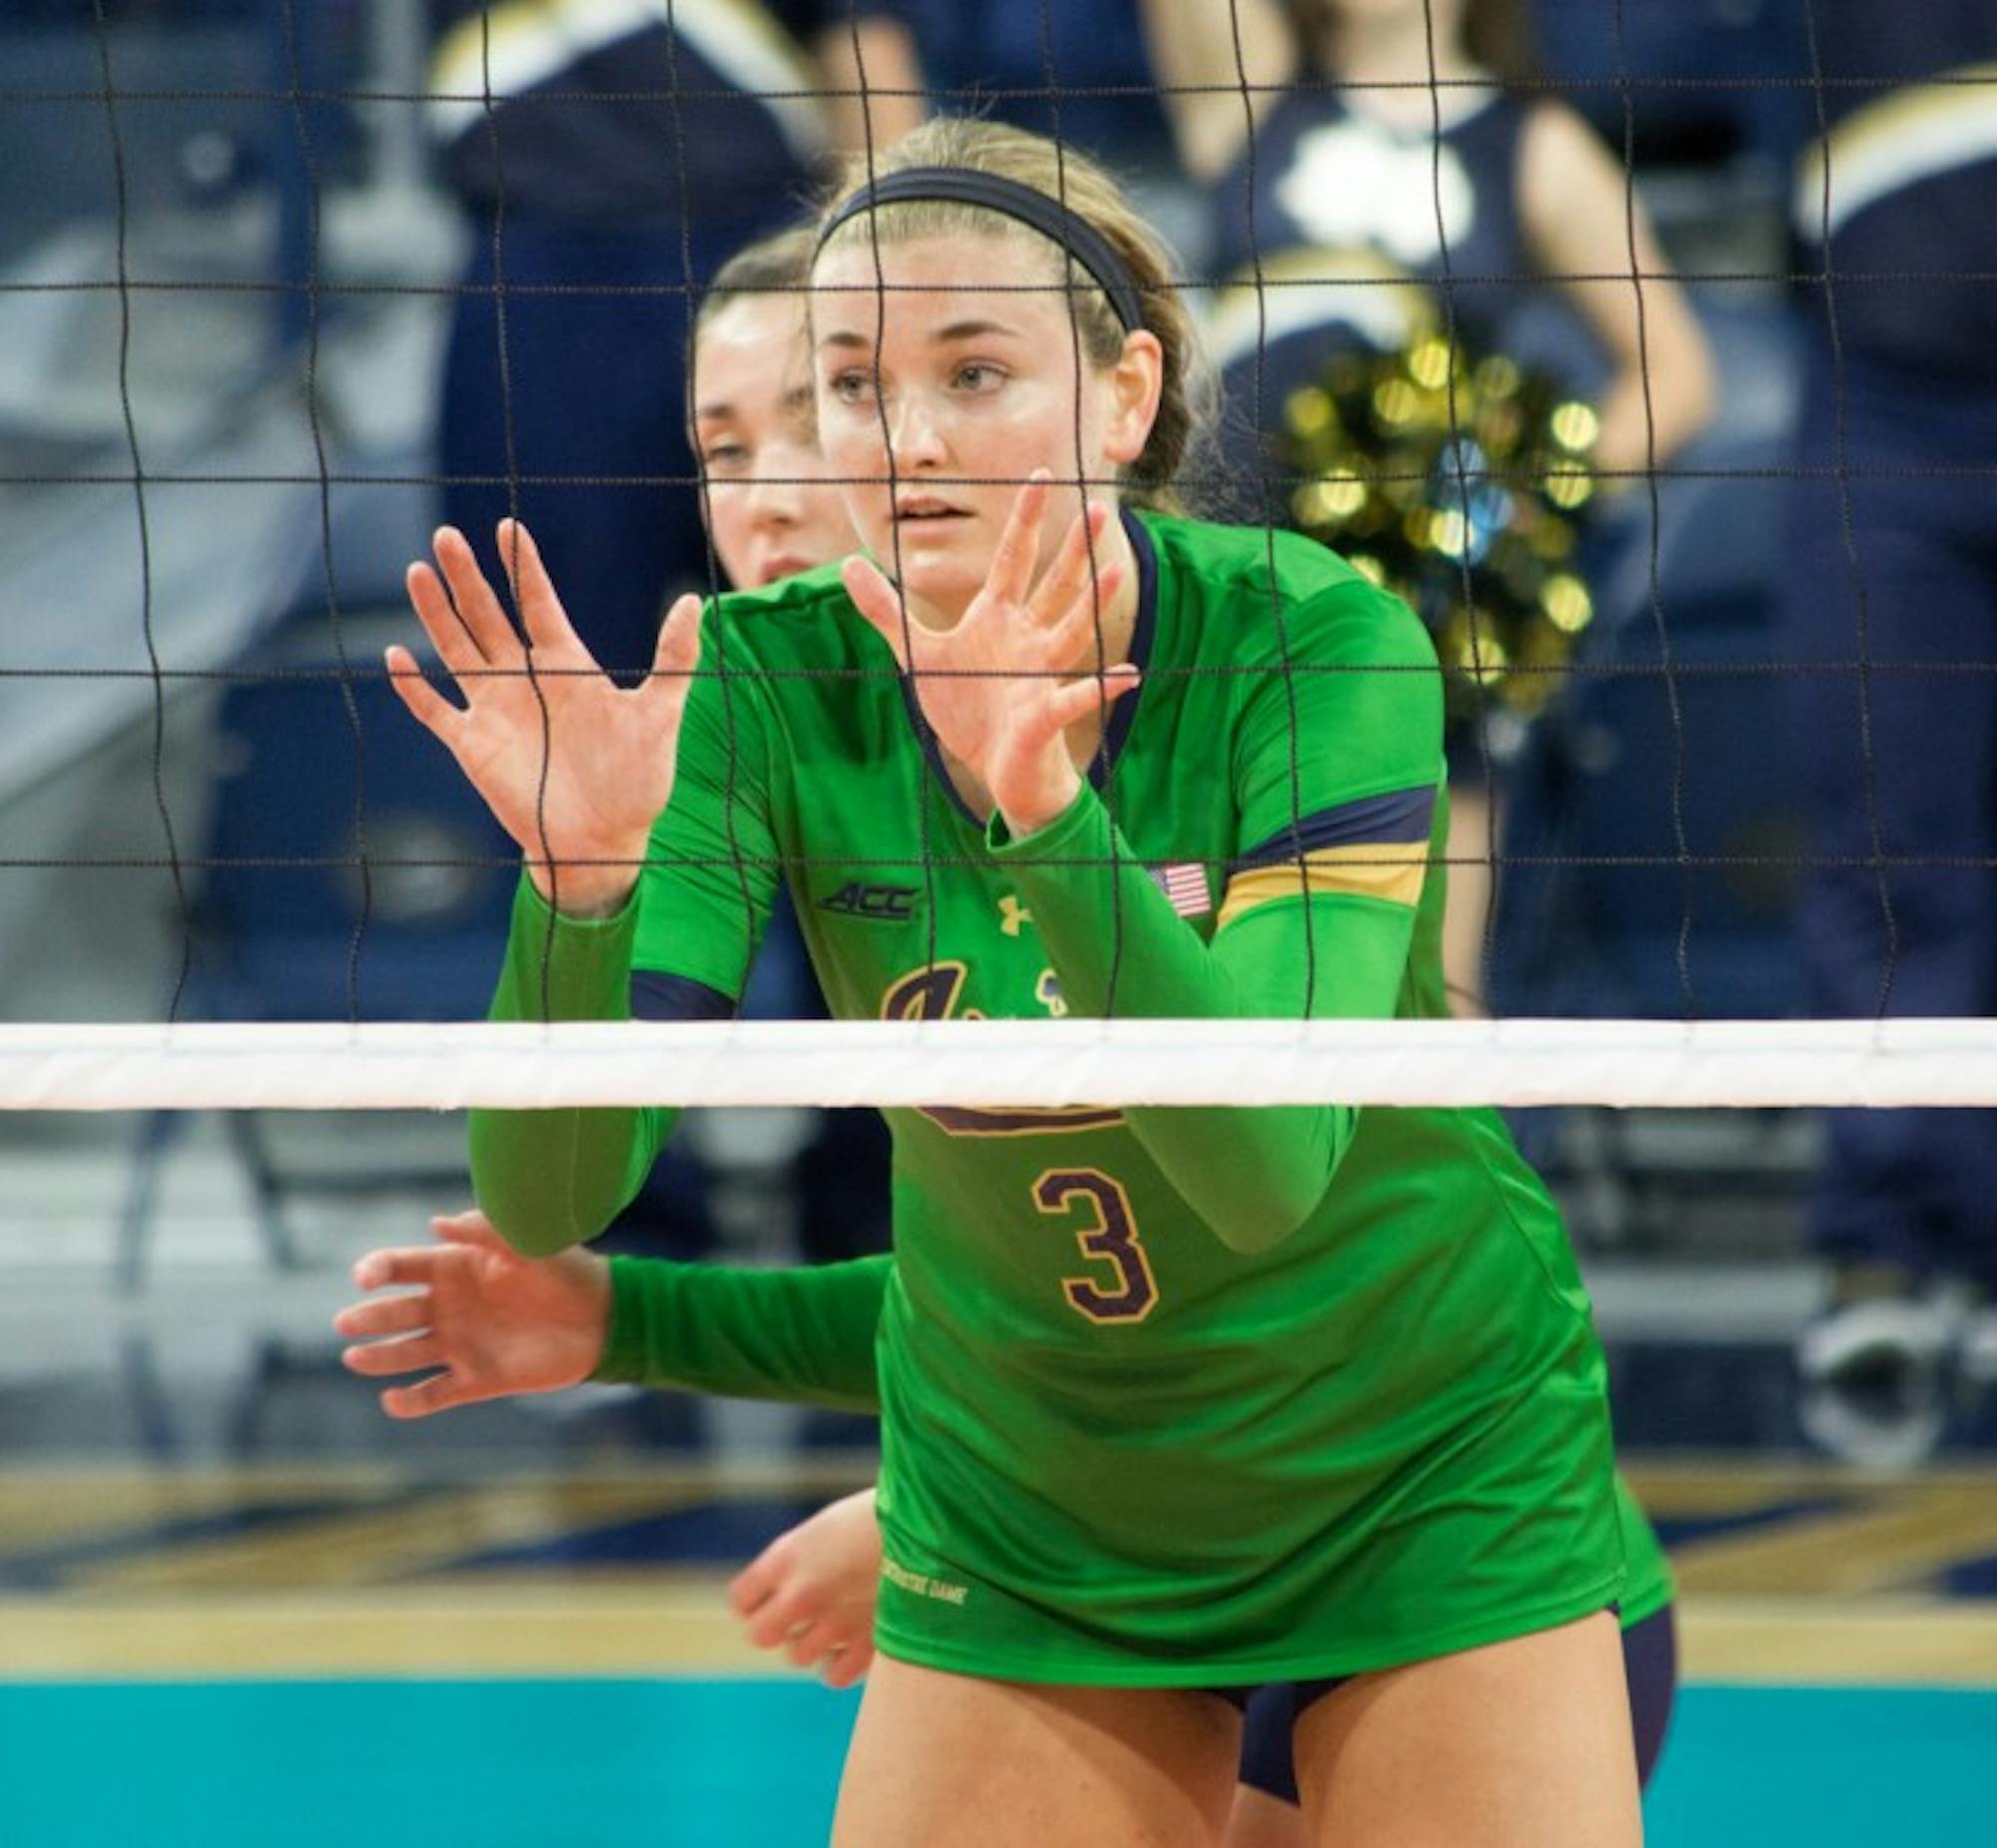 Irish junior middle blocker Sam Fry prepares for a serve during Notre Dame’s 3-0 victory over Western Michigan at Purcell Pavilion on Saturday. Fry recorded 25 kills over the team’s three matches.